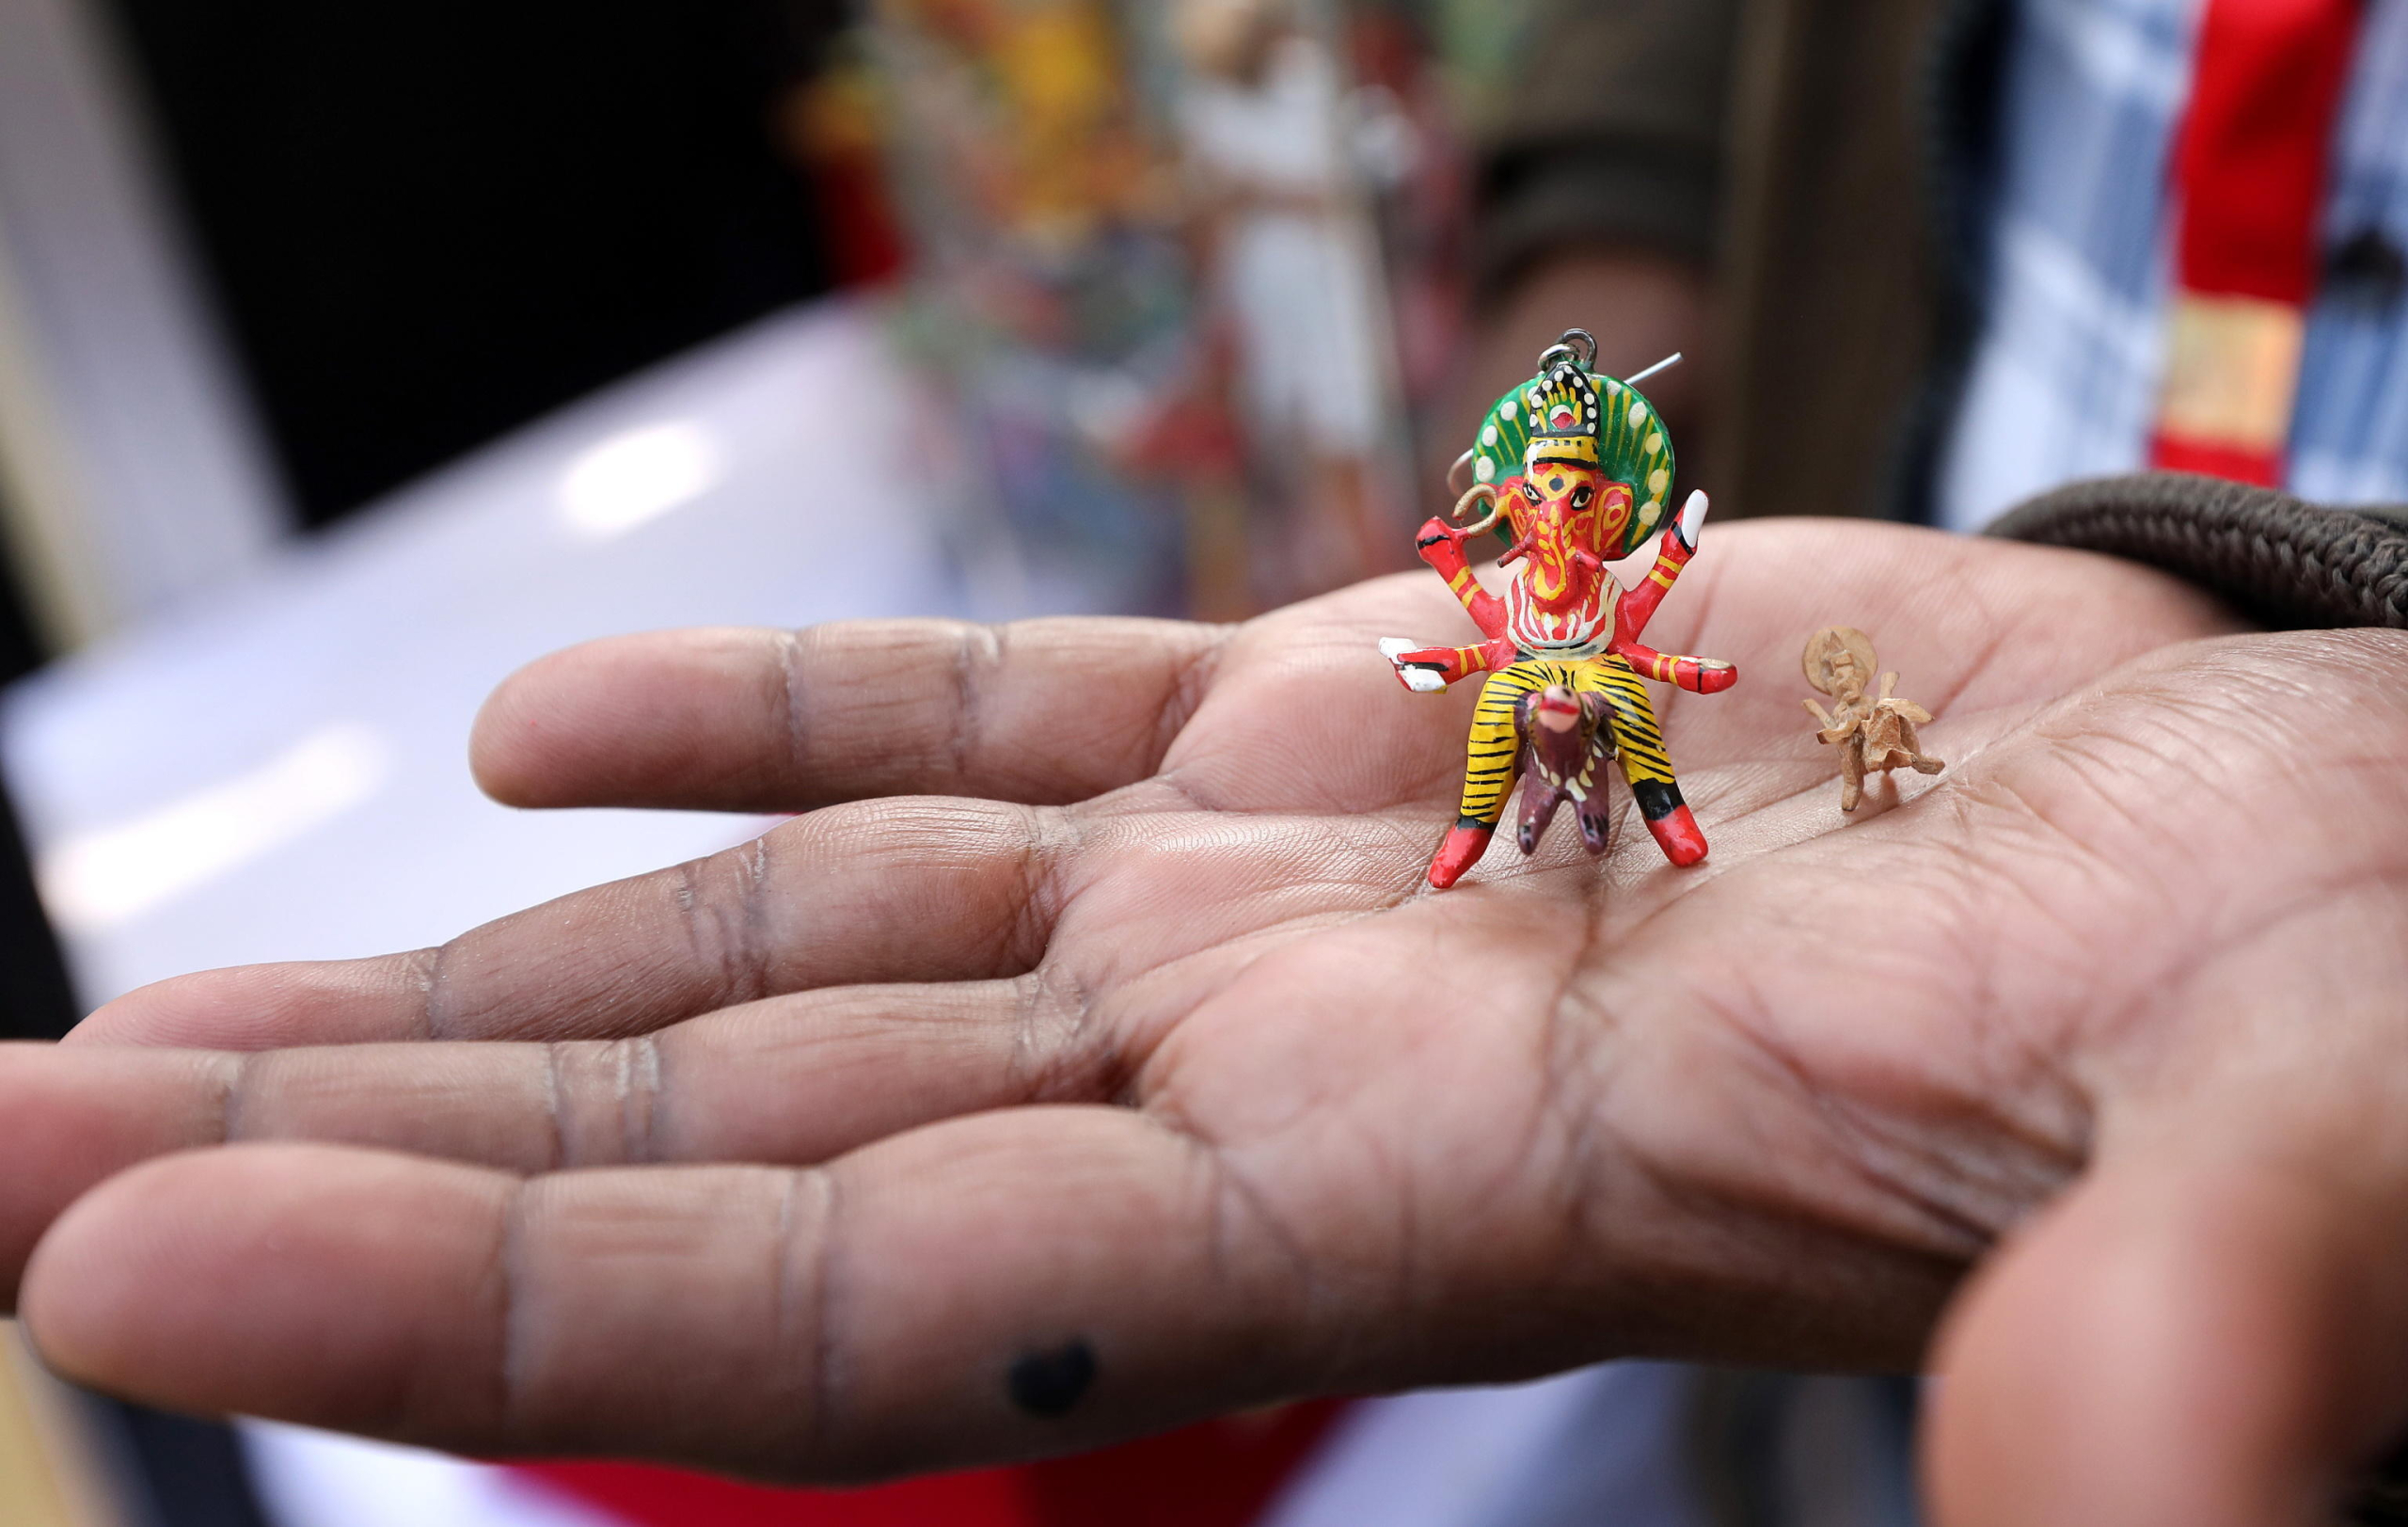 epa11087248 A small idol of Lord Ganesha is displayed at the India International Ramayana Festival in New Delhi, India, 18 January 2024. Indian Council of Cultural Relations (ICCR) organized a five-day long festival emphasizing the enduring relevance and universality of the Ramayana ahead of the Pran Pratistha ceremony, or the inauguration ceremony of the Lord Ram temple in Ayodhya, that is scheduled for 22 January 2024. Pran Pratistha is the act which transforms an idol into a deity, giving it the capacity to accept prayers. The Indian prime minister will perform the Pran Pratishtha ceremony on the inauguration day.  EPA/HARISH TYAGI